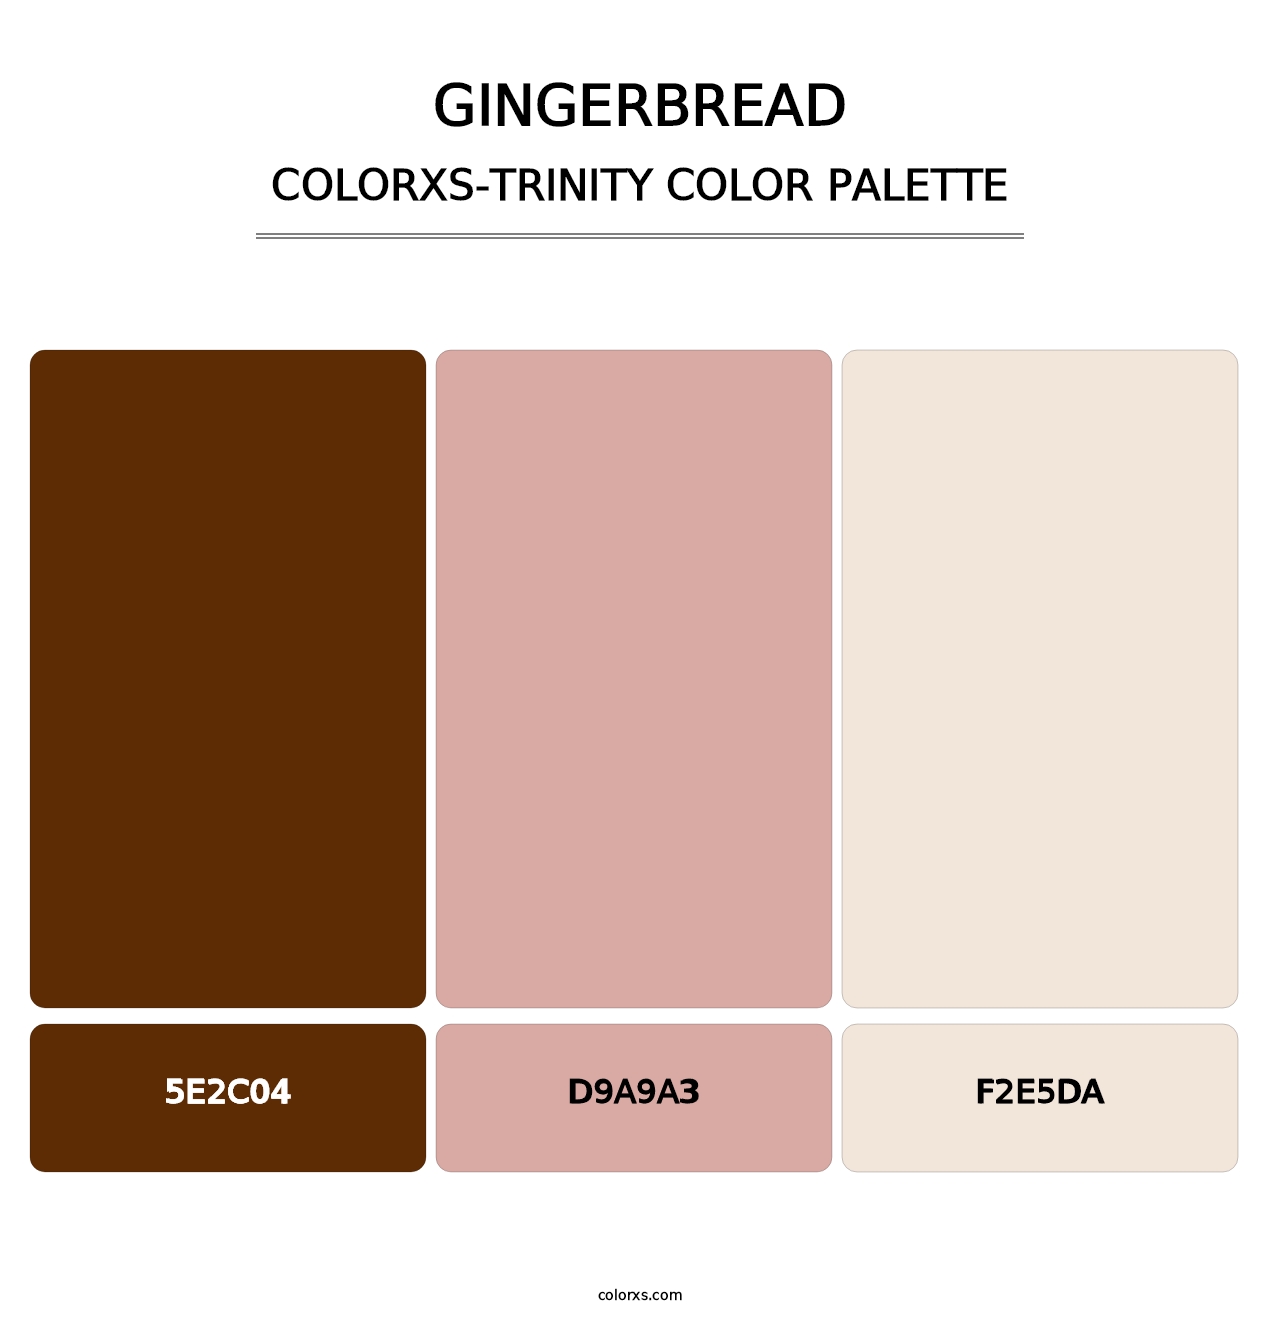 Gingerbread - Colorxs Trinity Palette